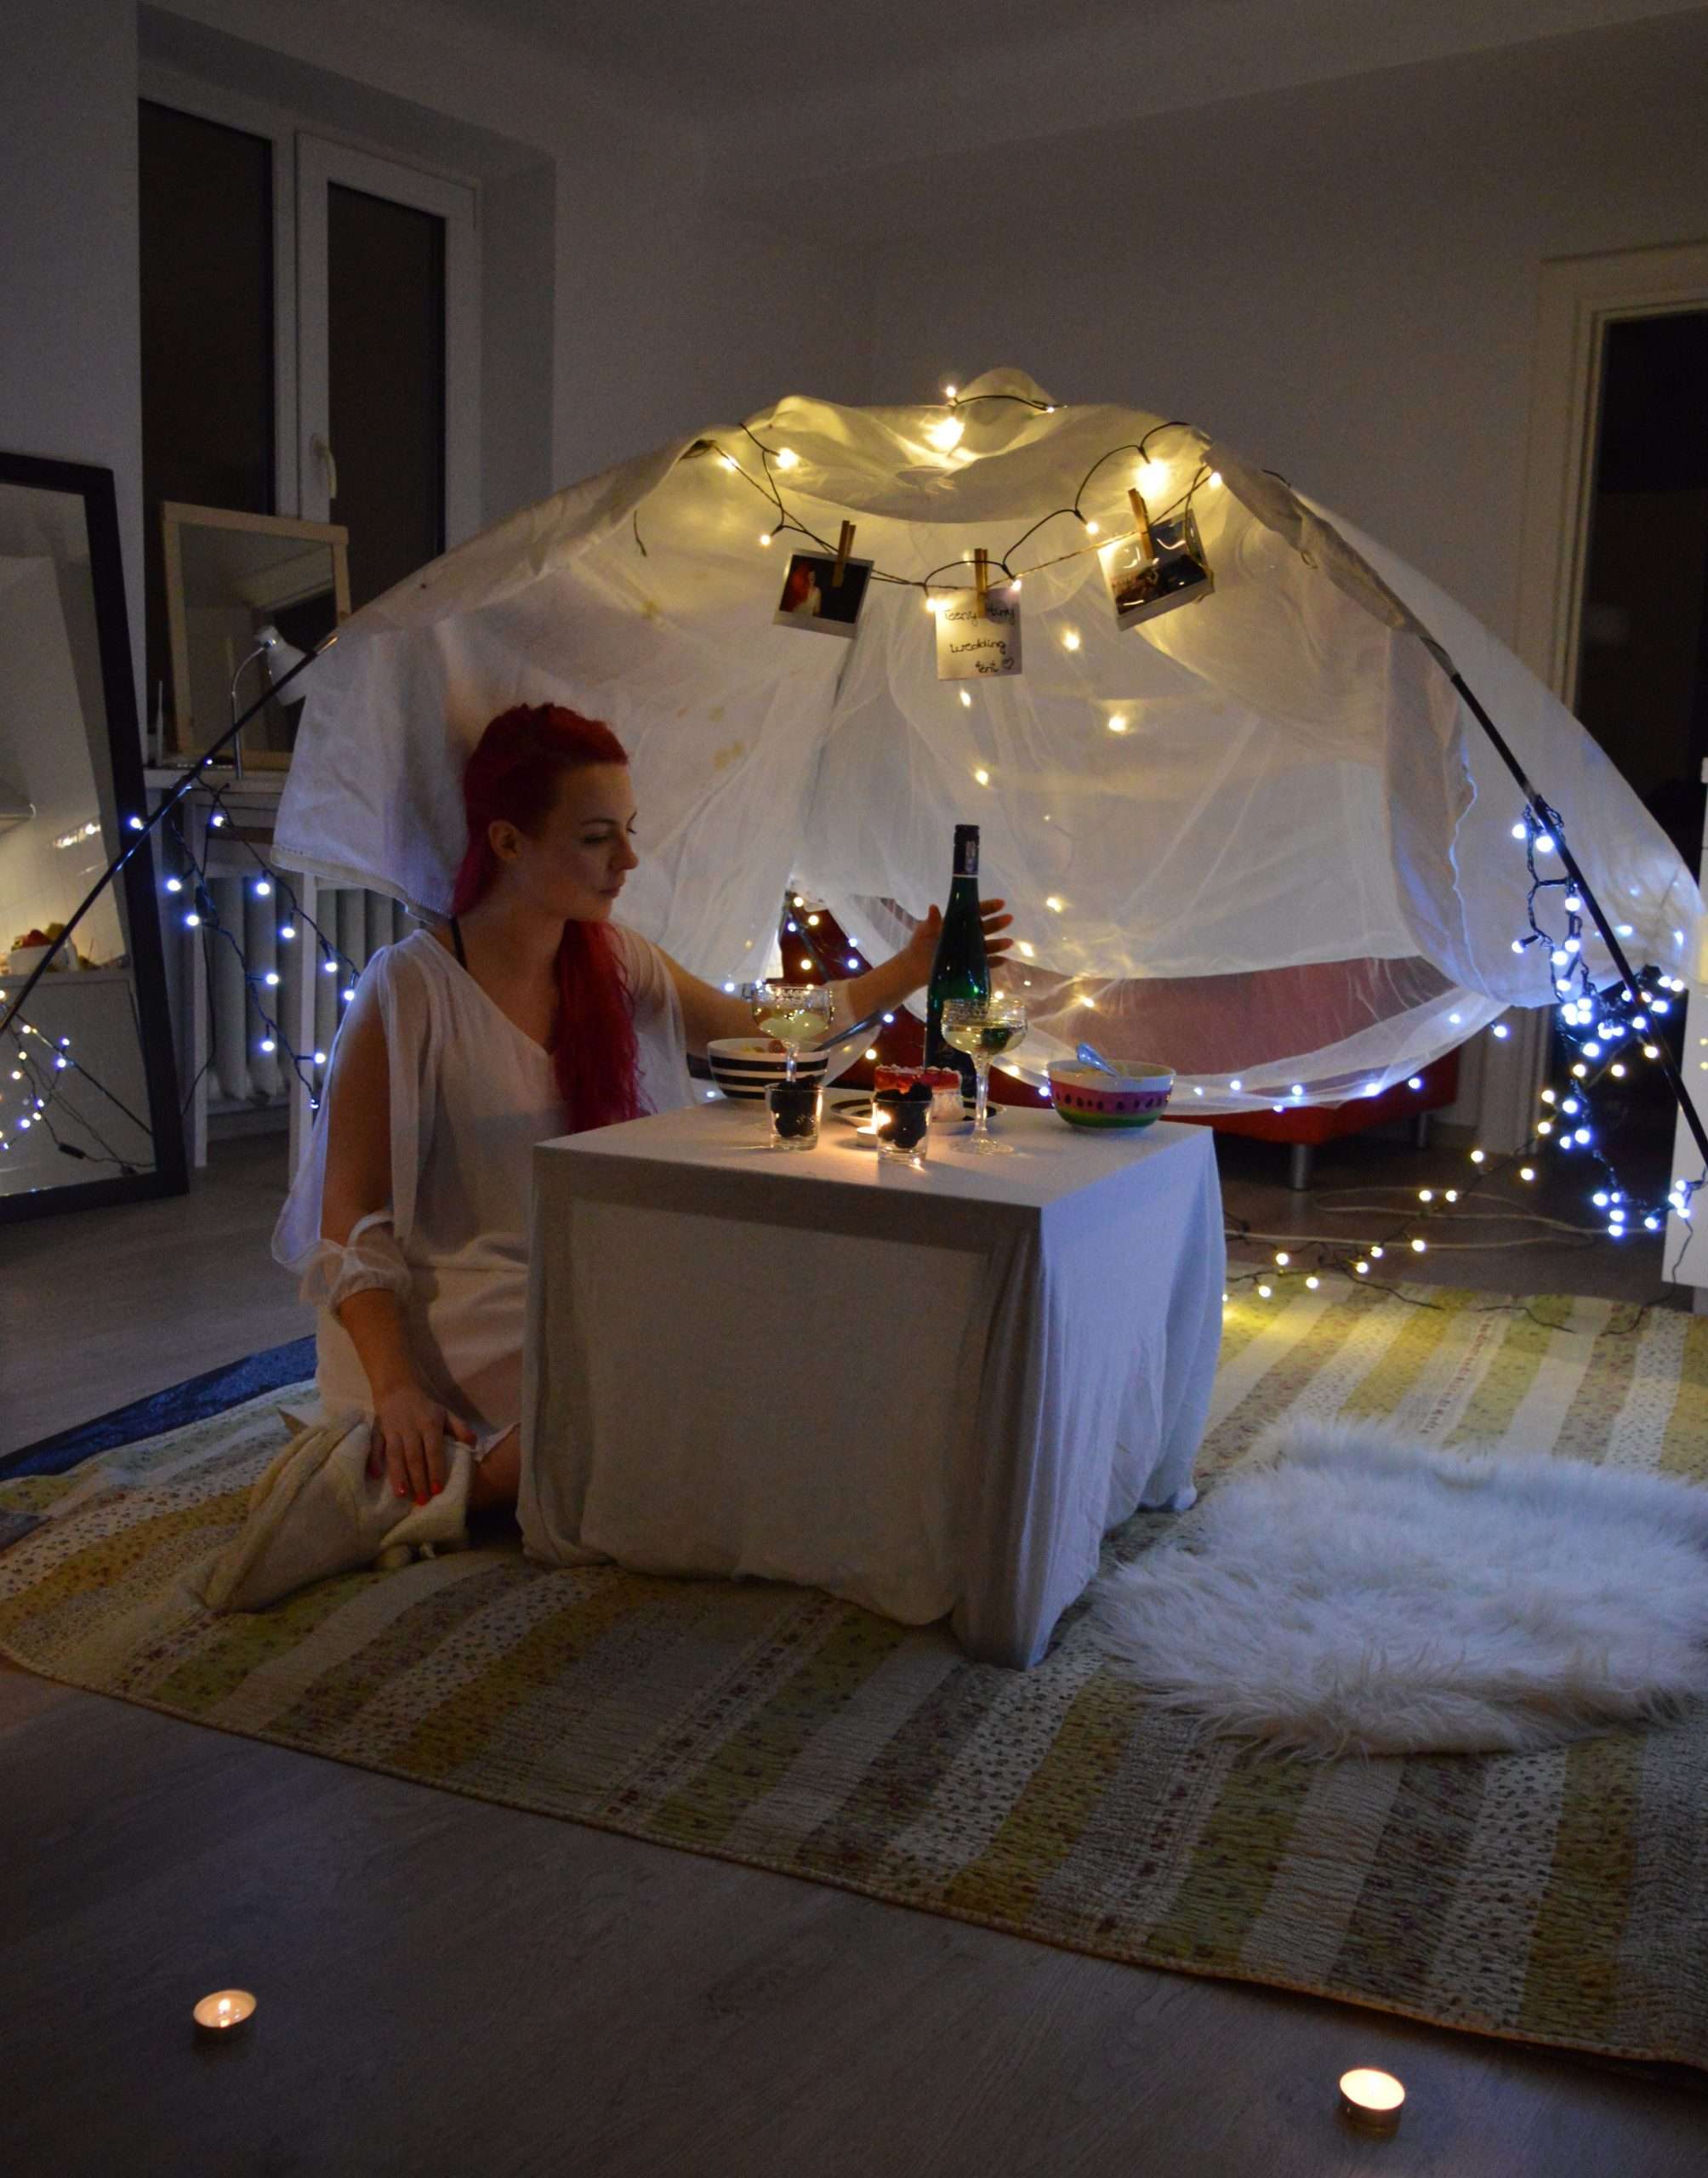 Cozy romantic surprise birthday dinner in the tent at home ...